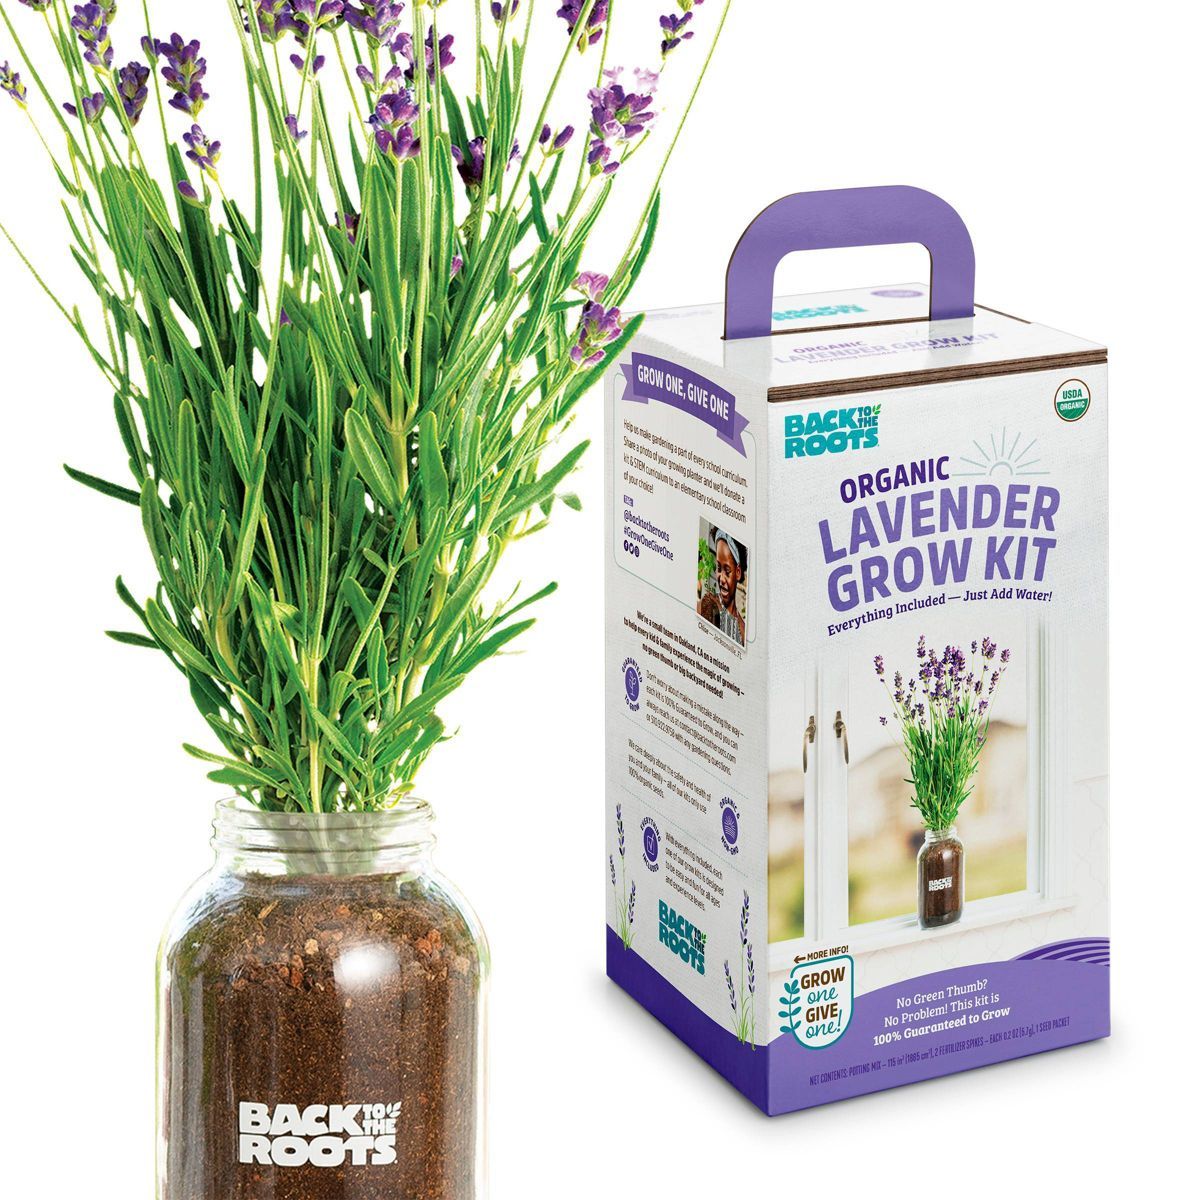 Back to the Roots Organic Lavender Grow Kit | Target